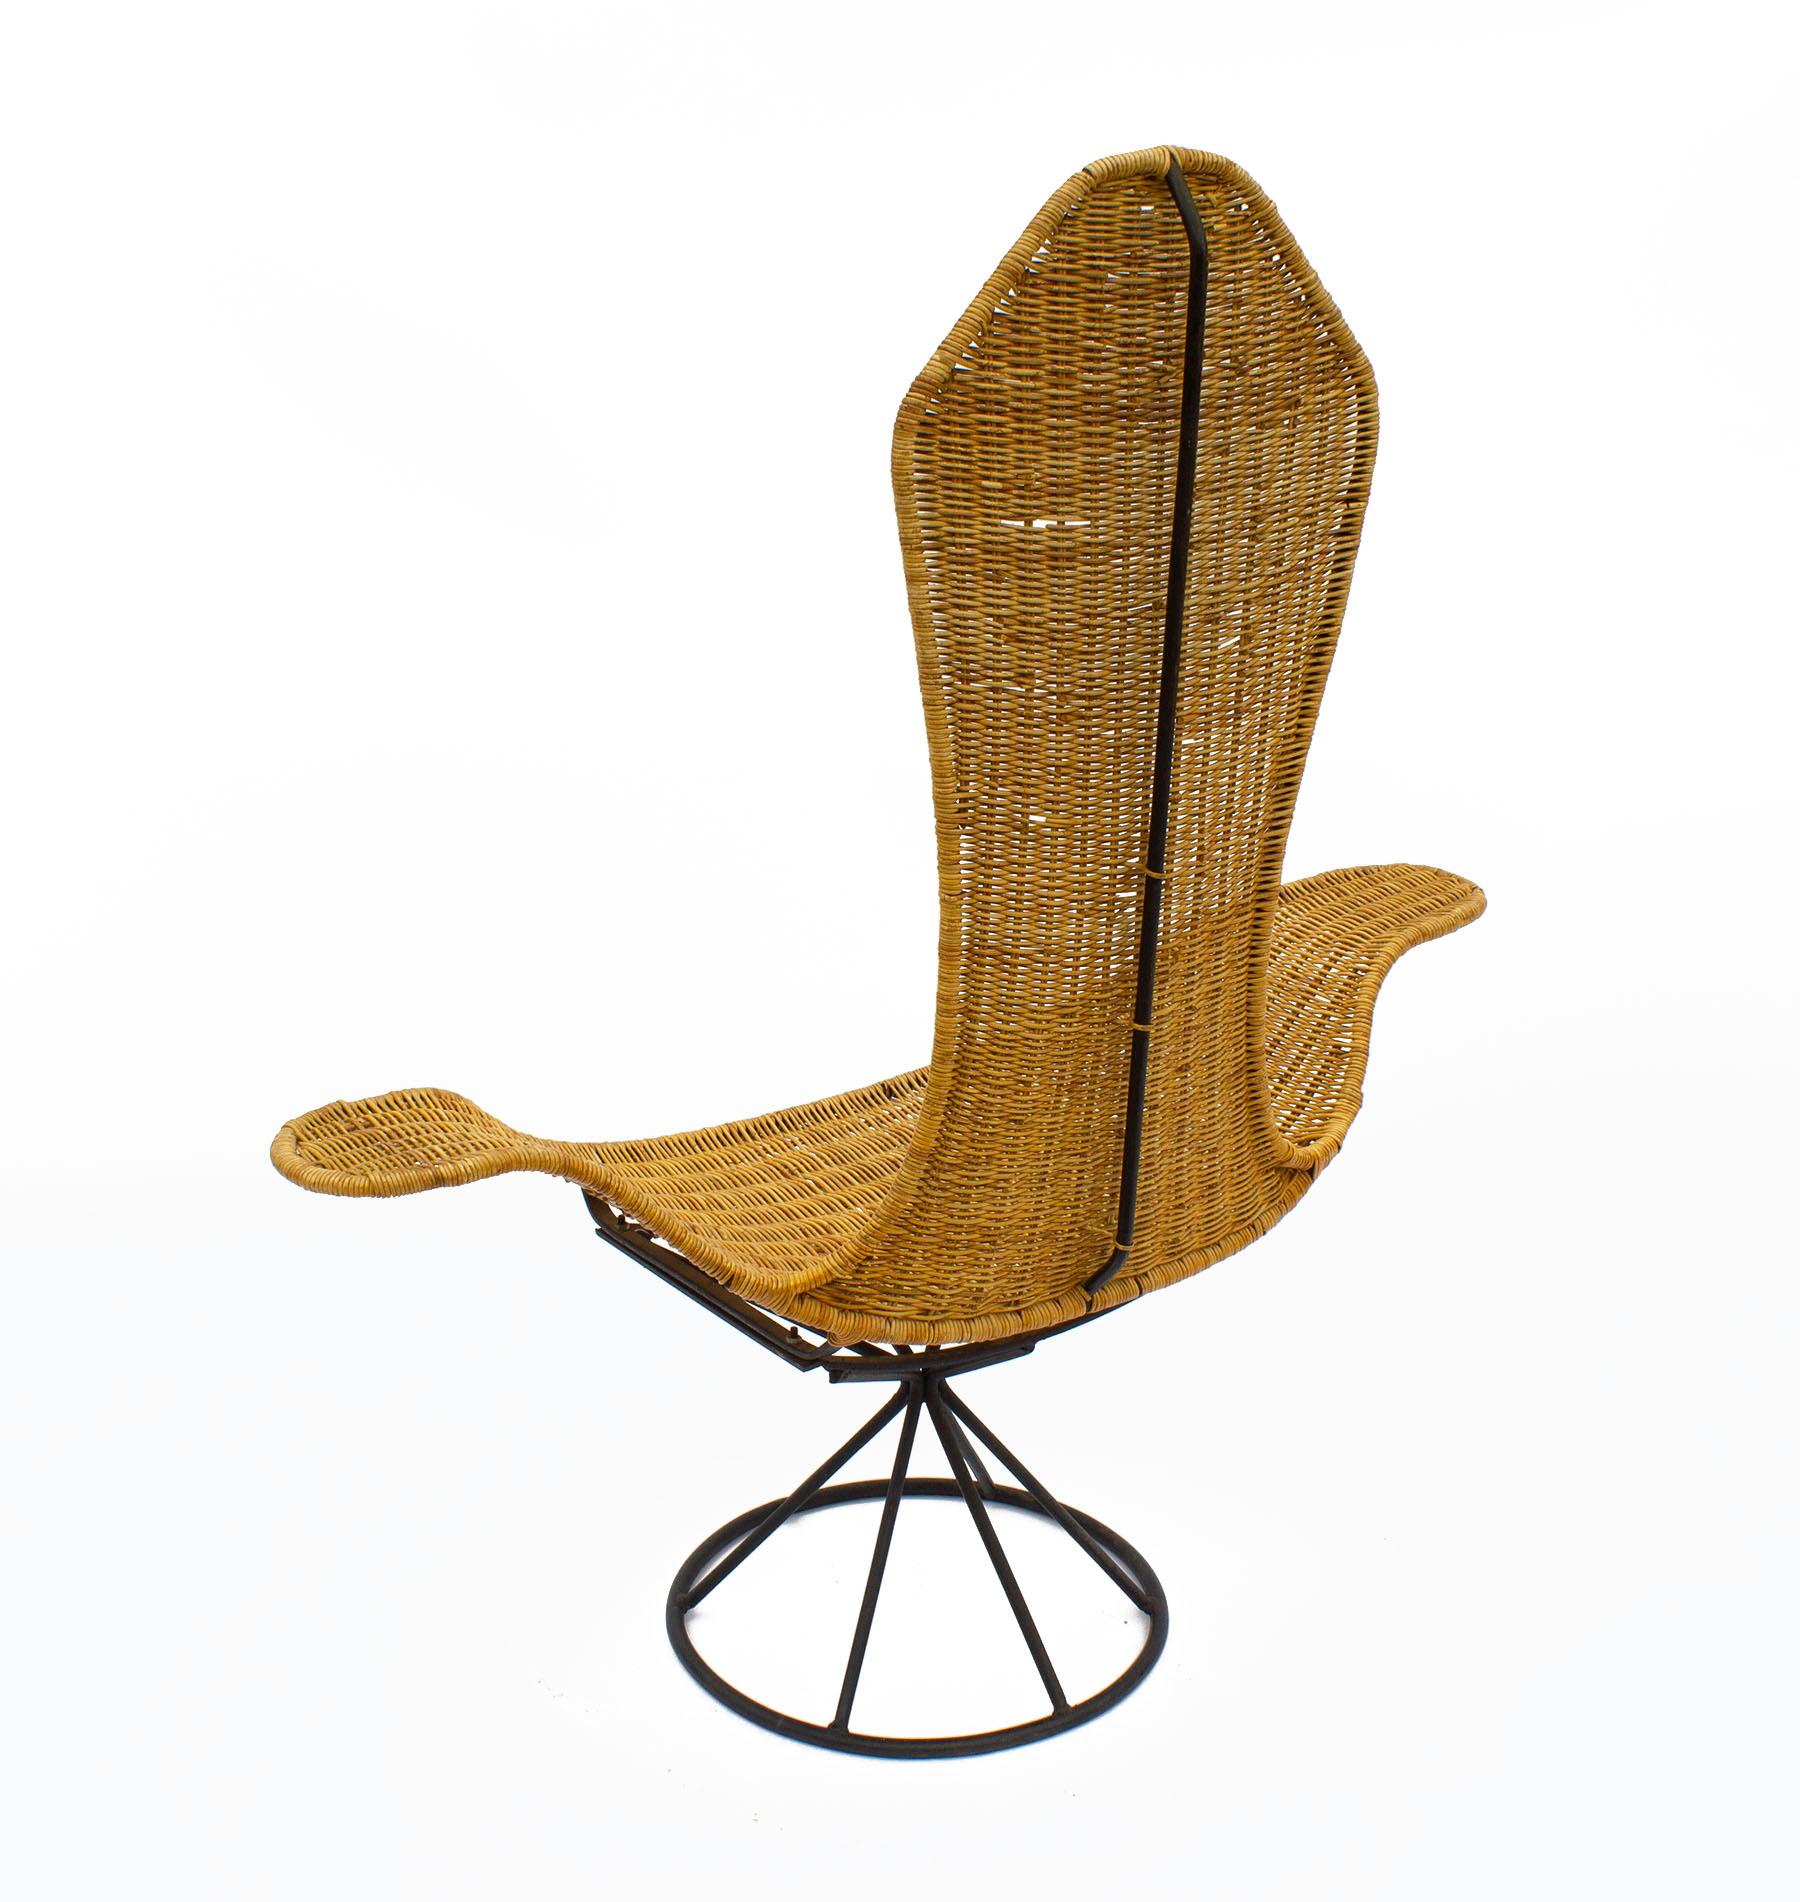 Bohemian Danny Ho Fong Wave Chair for Tropi-Cal Rattan and Steel, 1960s